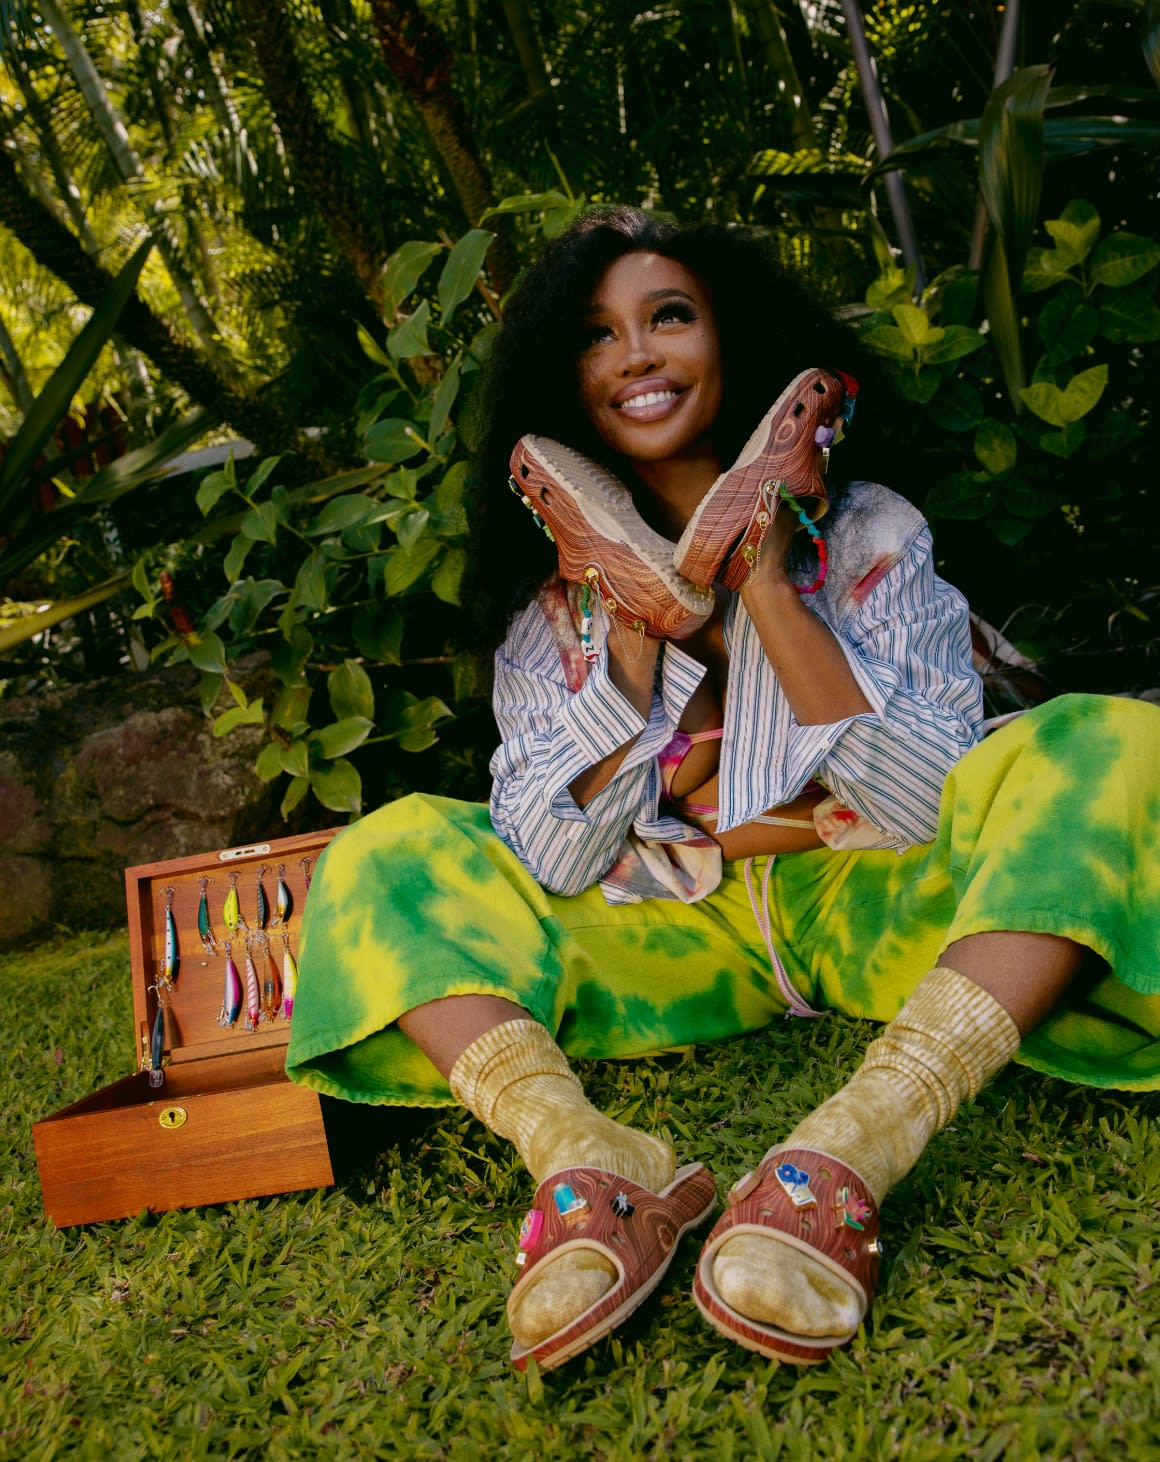 Sza posing in natural setting wearing Wood Print Clogs on hands, and Wood Print Slides on Feet.